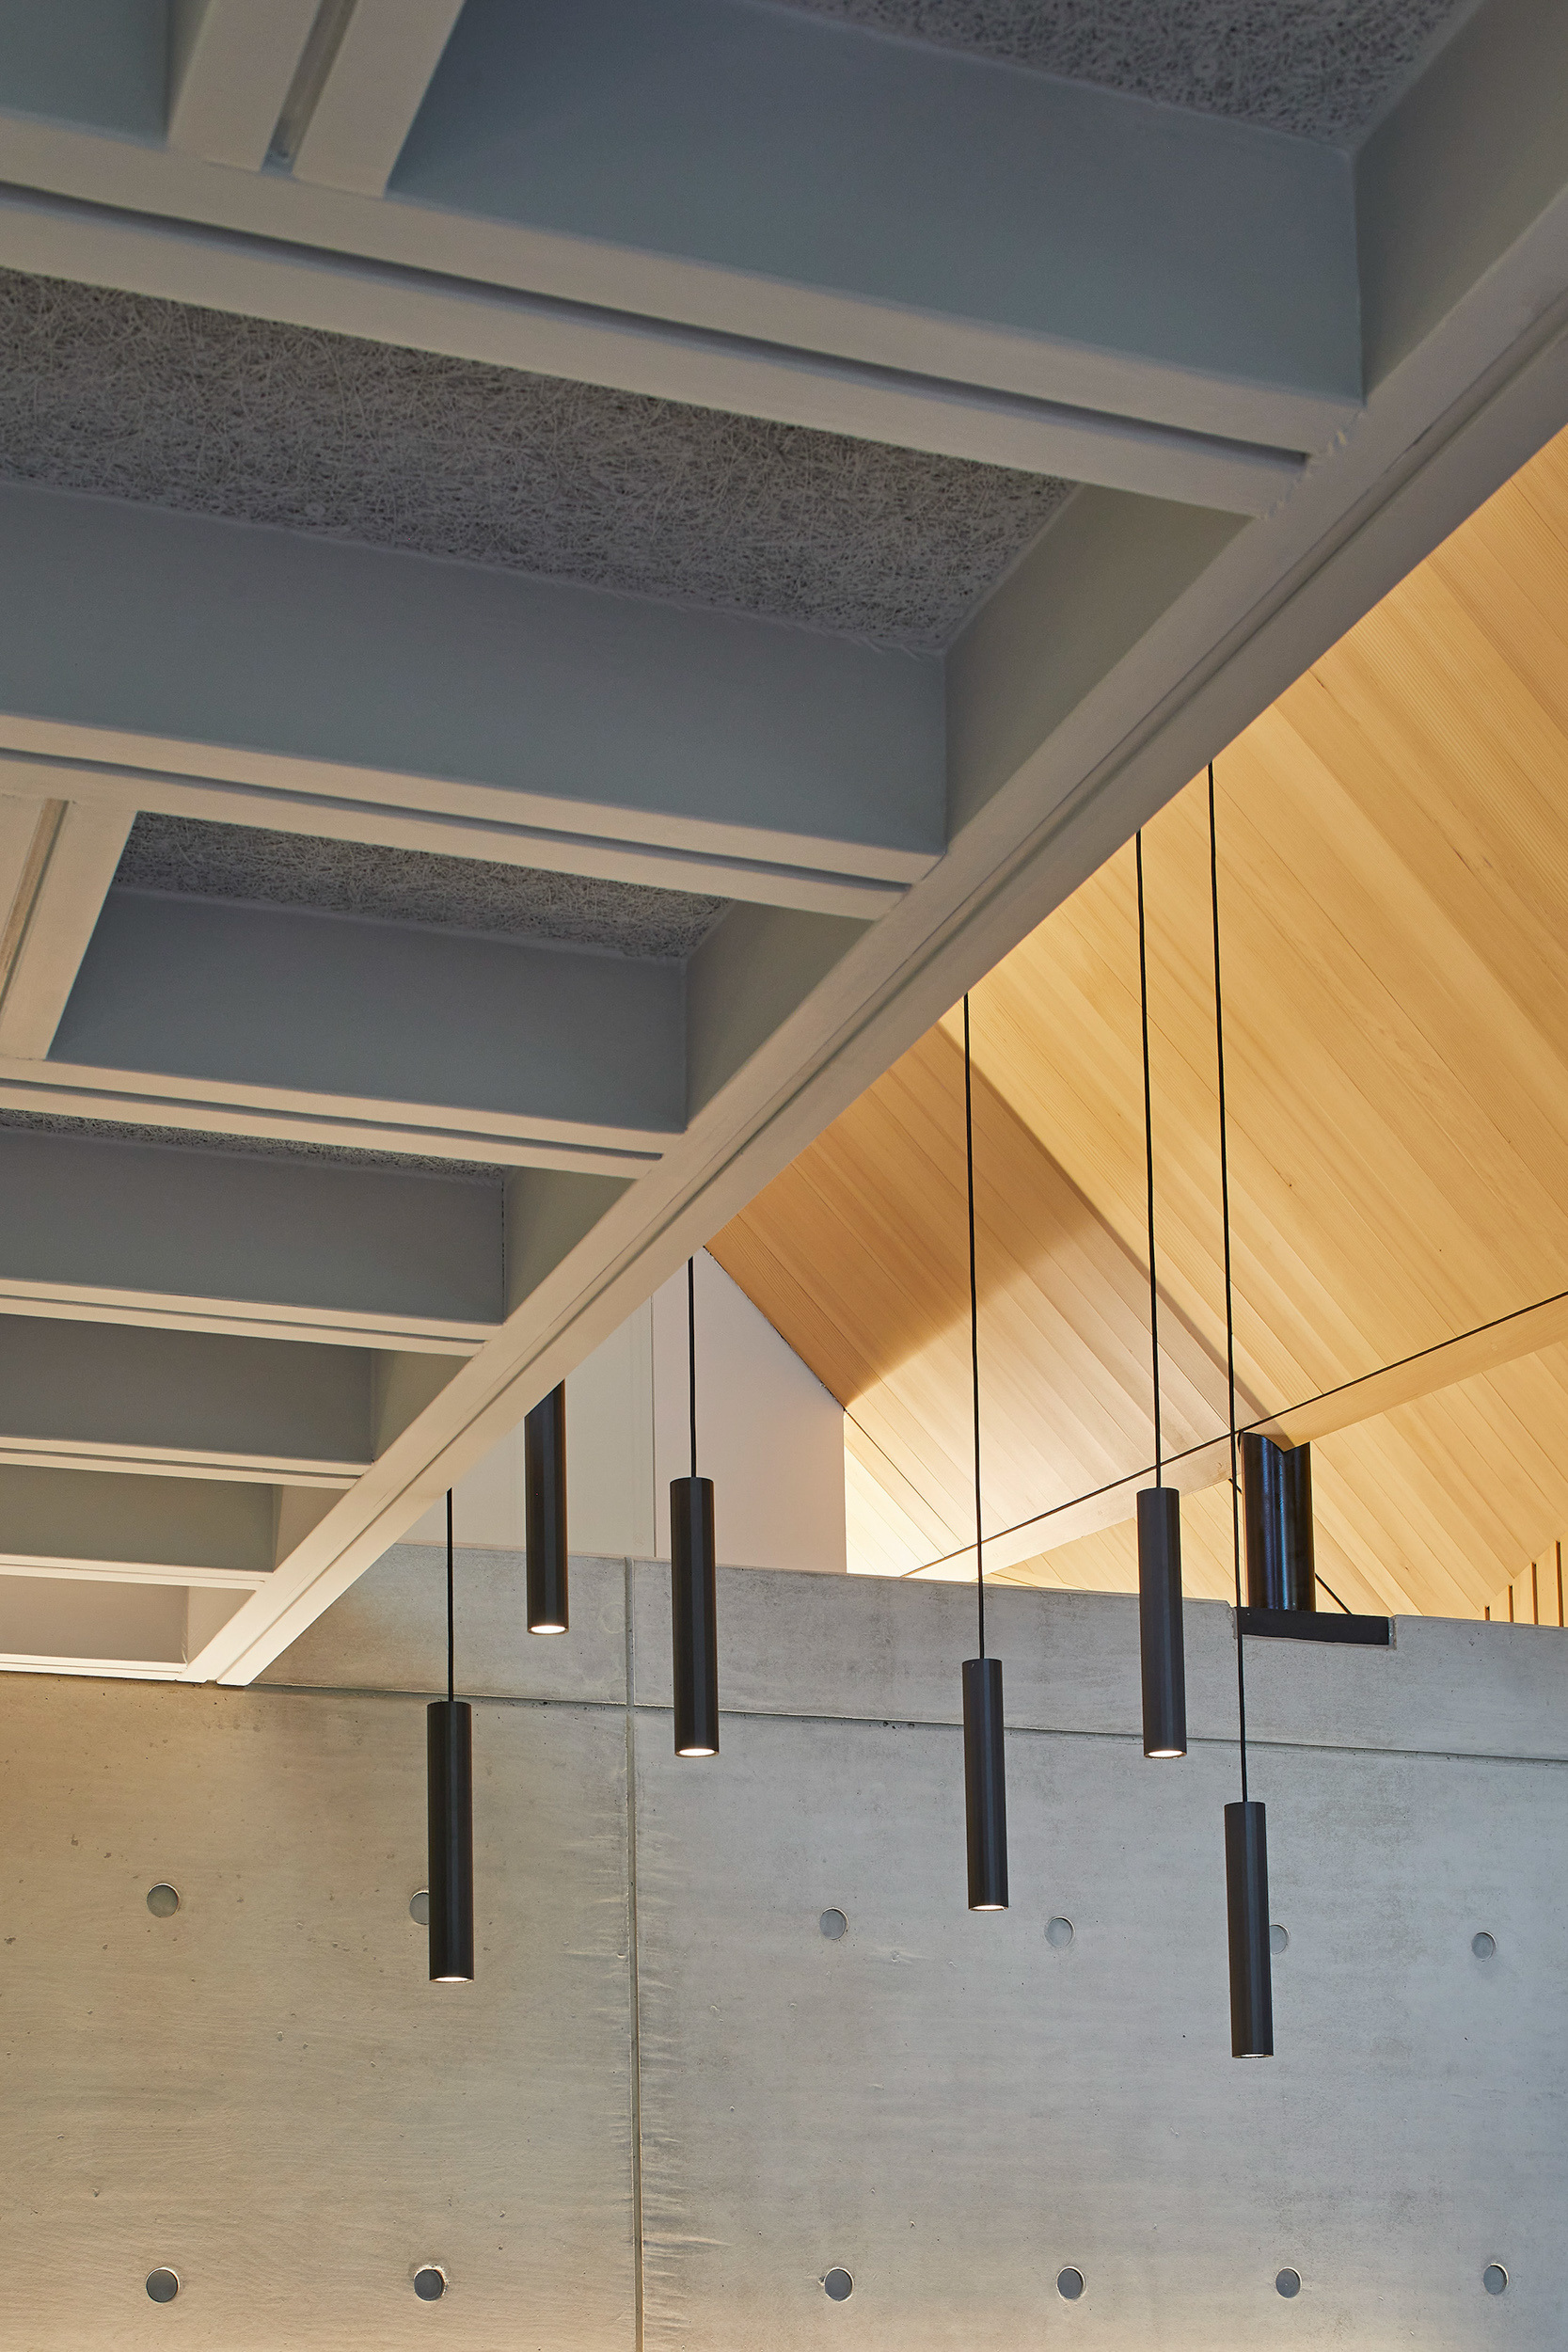 Lights from timber ceiling next to concrete wall in house | cdc studio cambridge architects